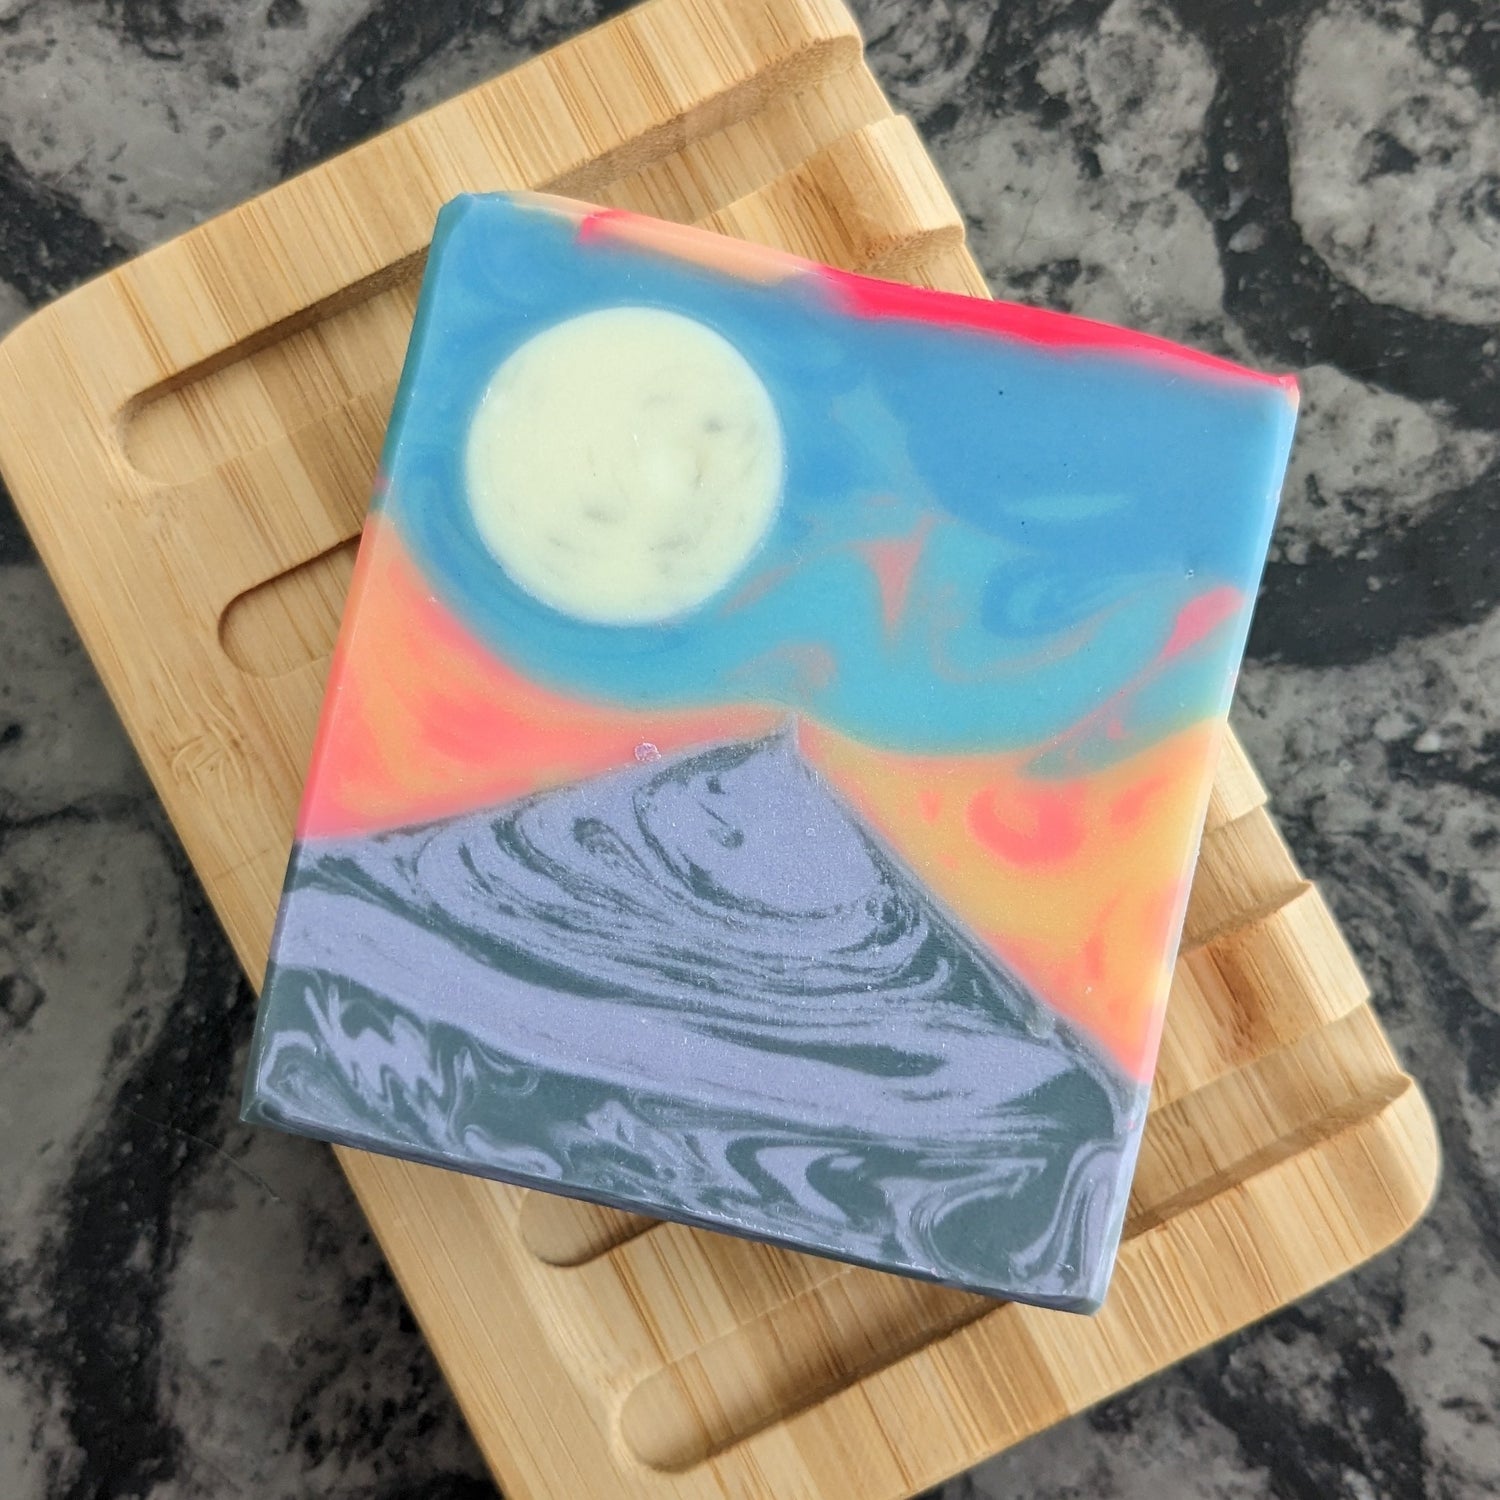 Soap with mountain and full moon design